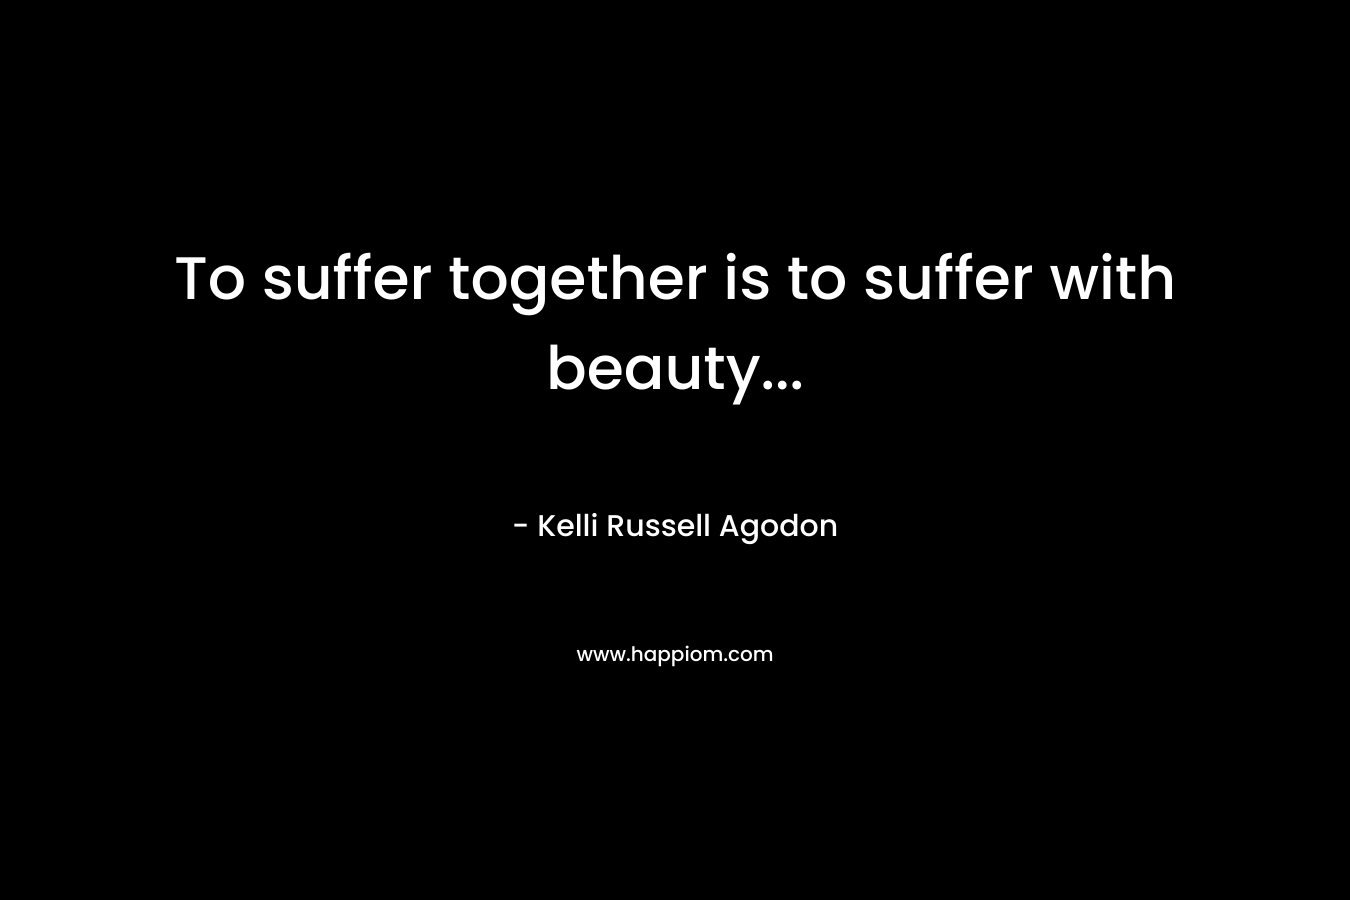 To suffer together is to suffer with beauty...